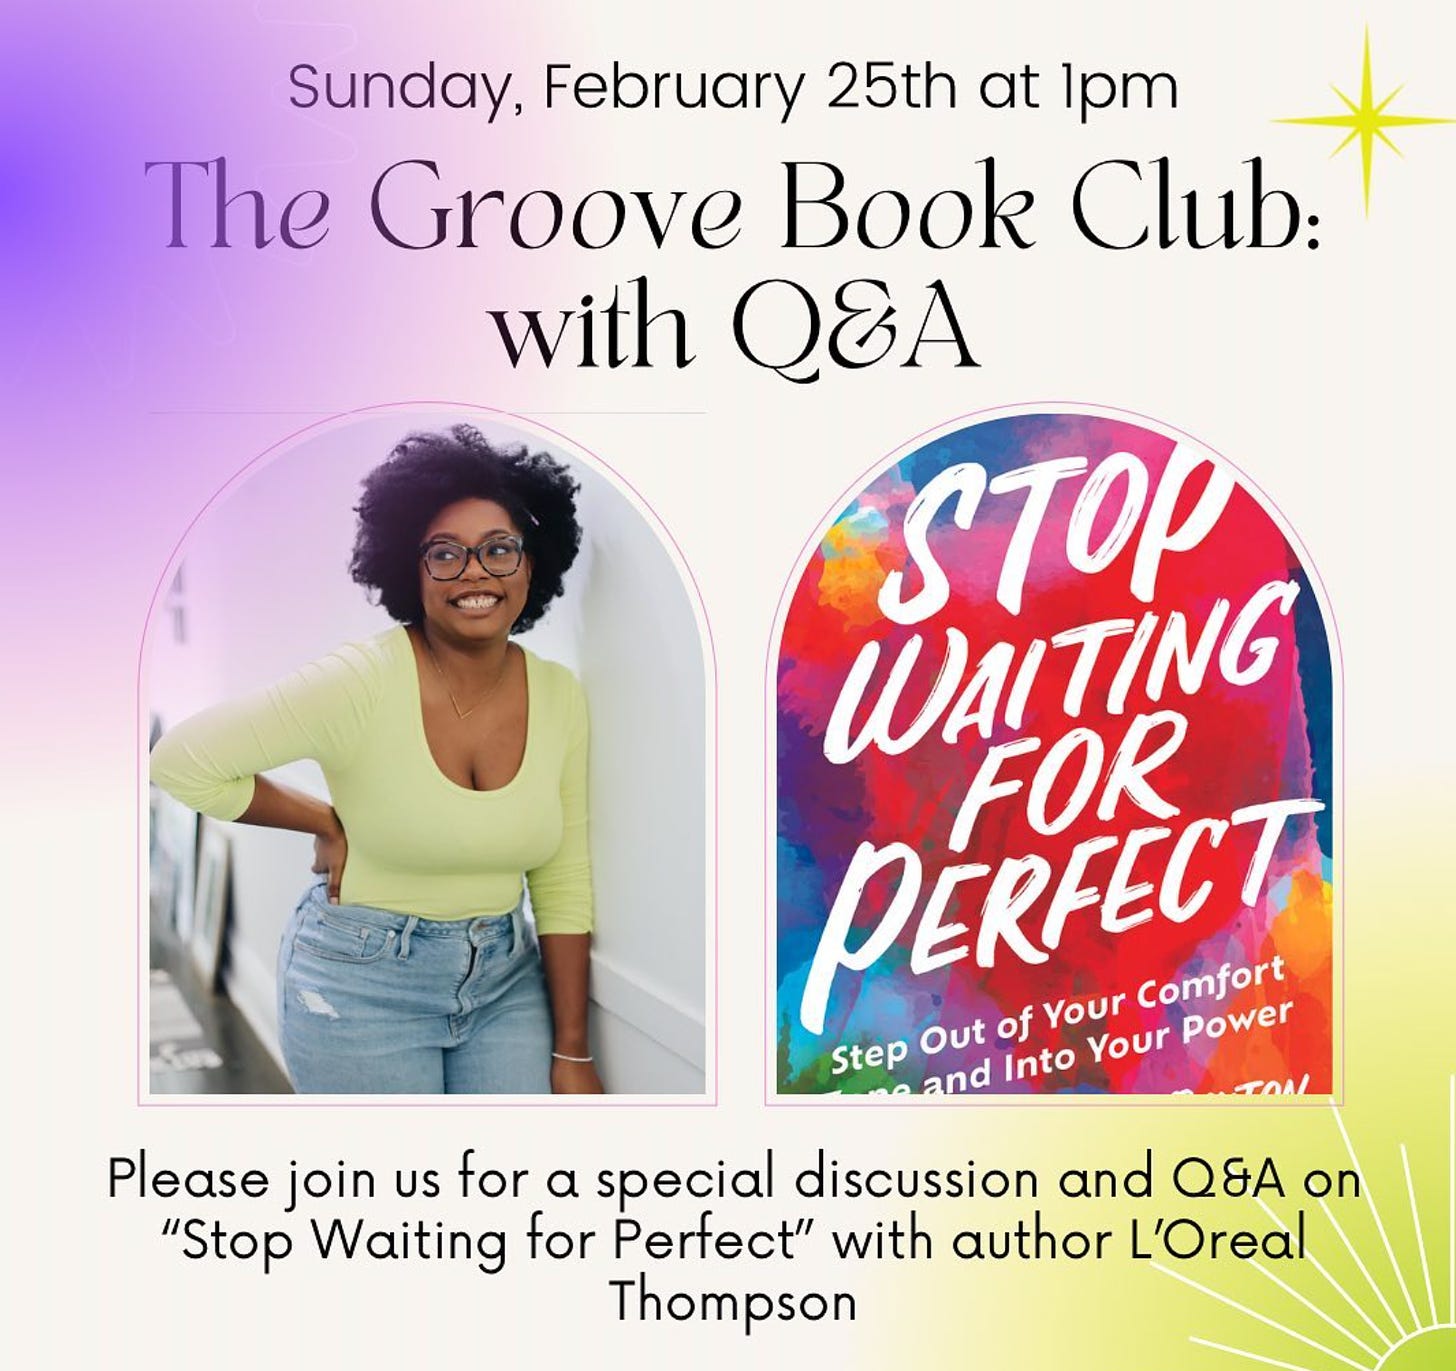 Infographic promoting a book club event on Sunday, Feb. 25 at The Groove in Chicago